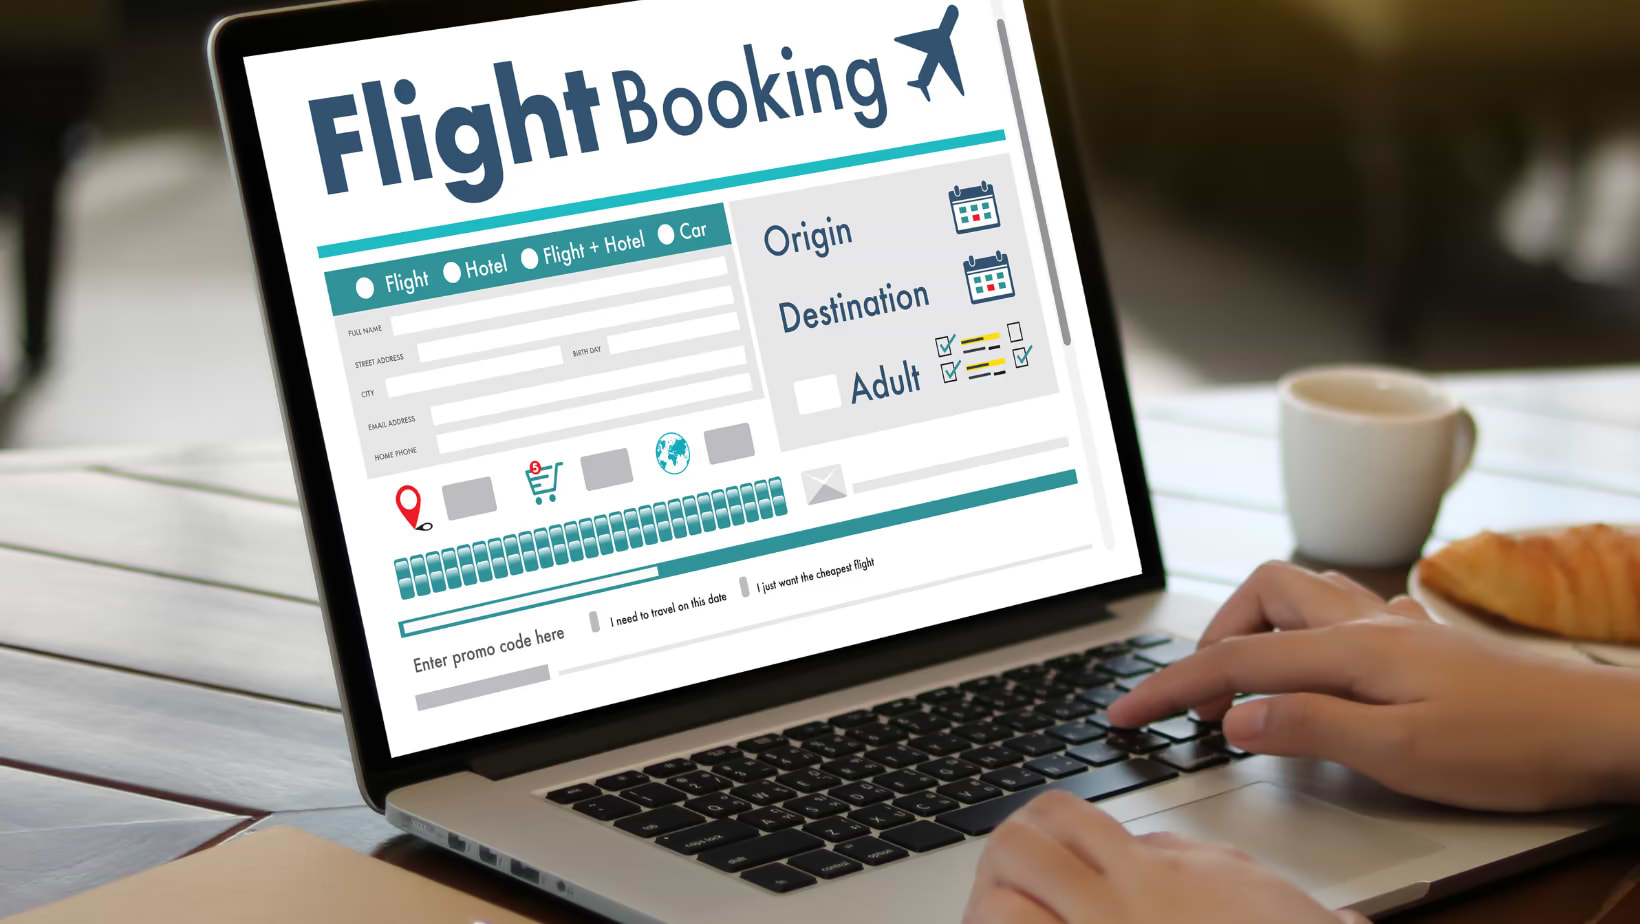 Finding cheap flight tickets on the computer